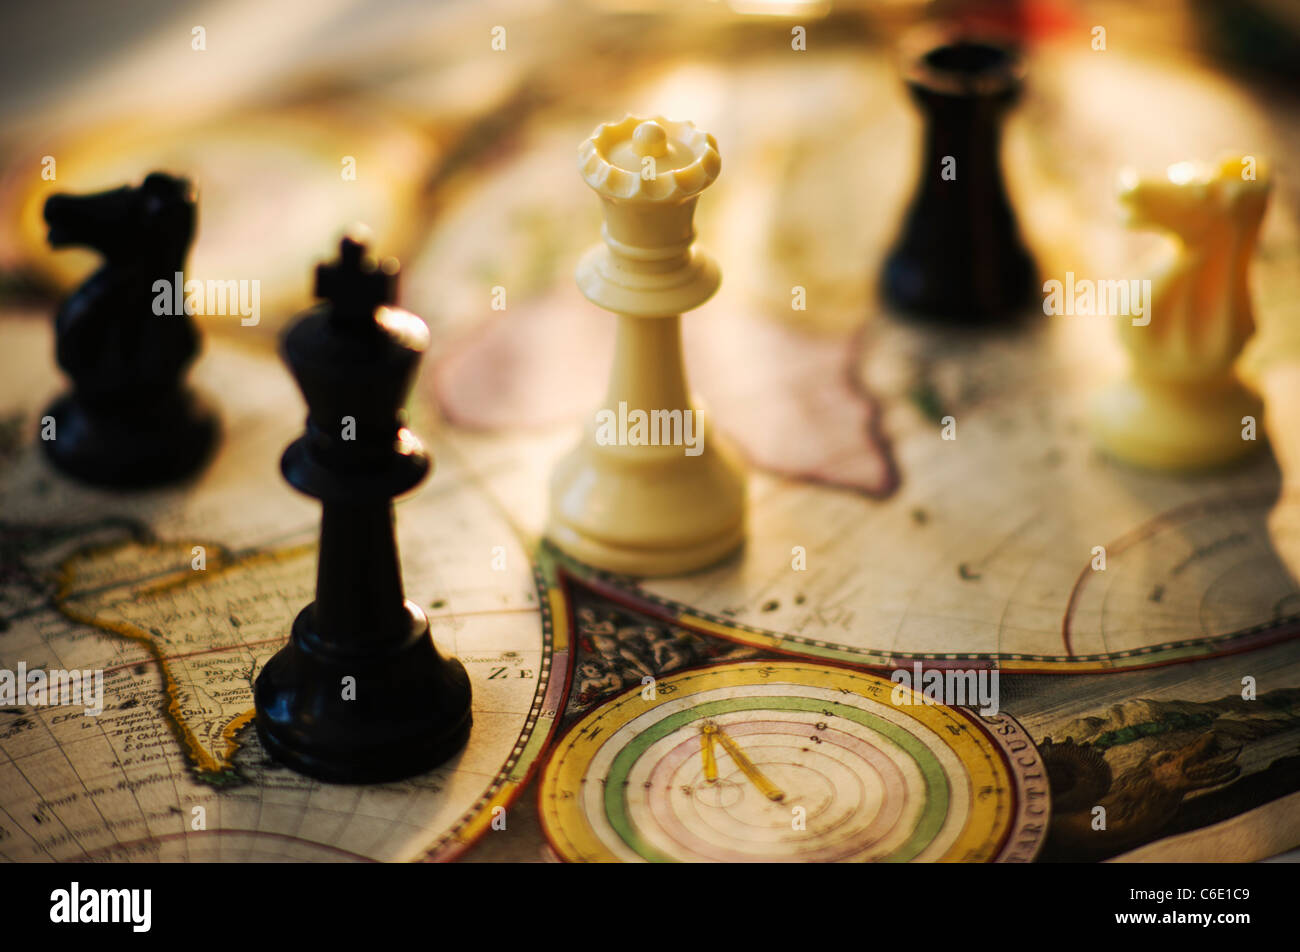 Chess Compass Stock Illustrations, Cliparts and Royalty Free Chess Compass  Vectors